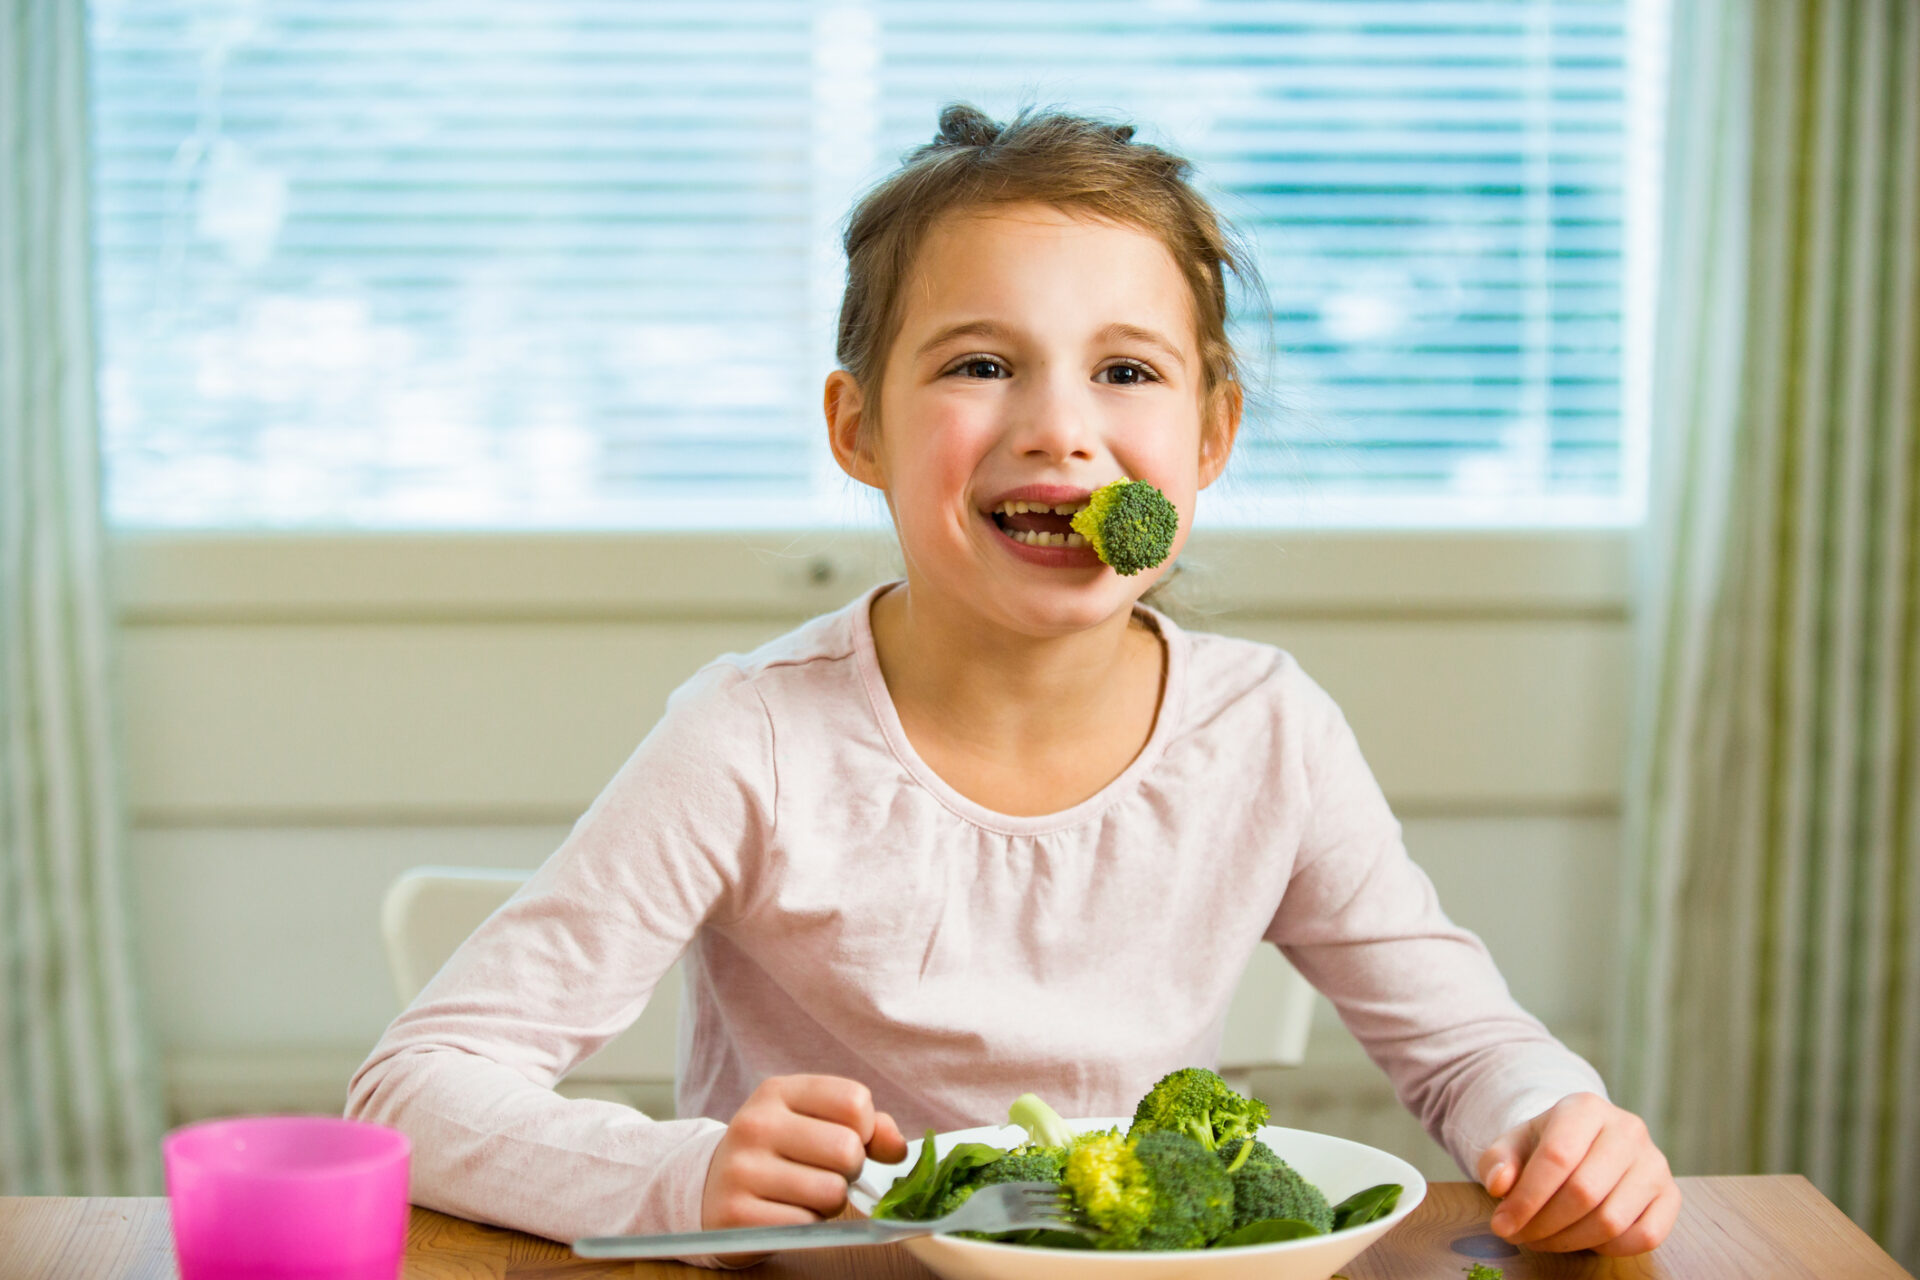 Cute girl eating spinach and broccoli at the table